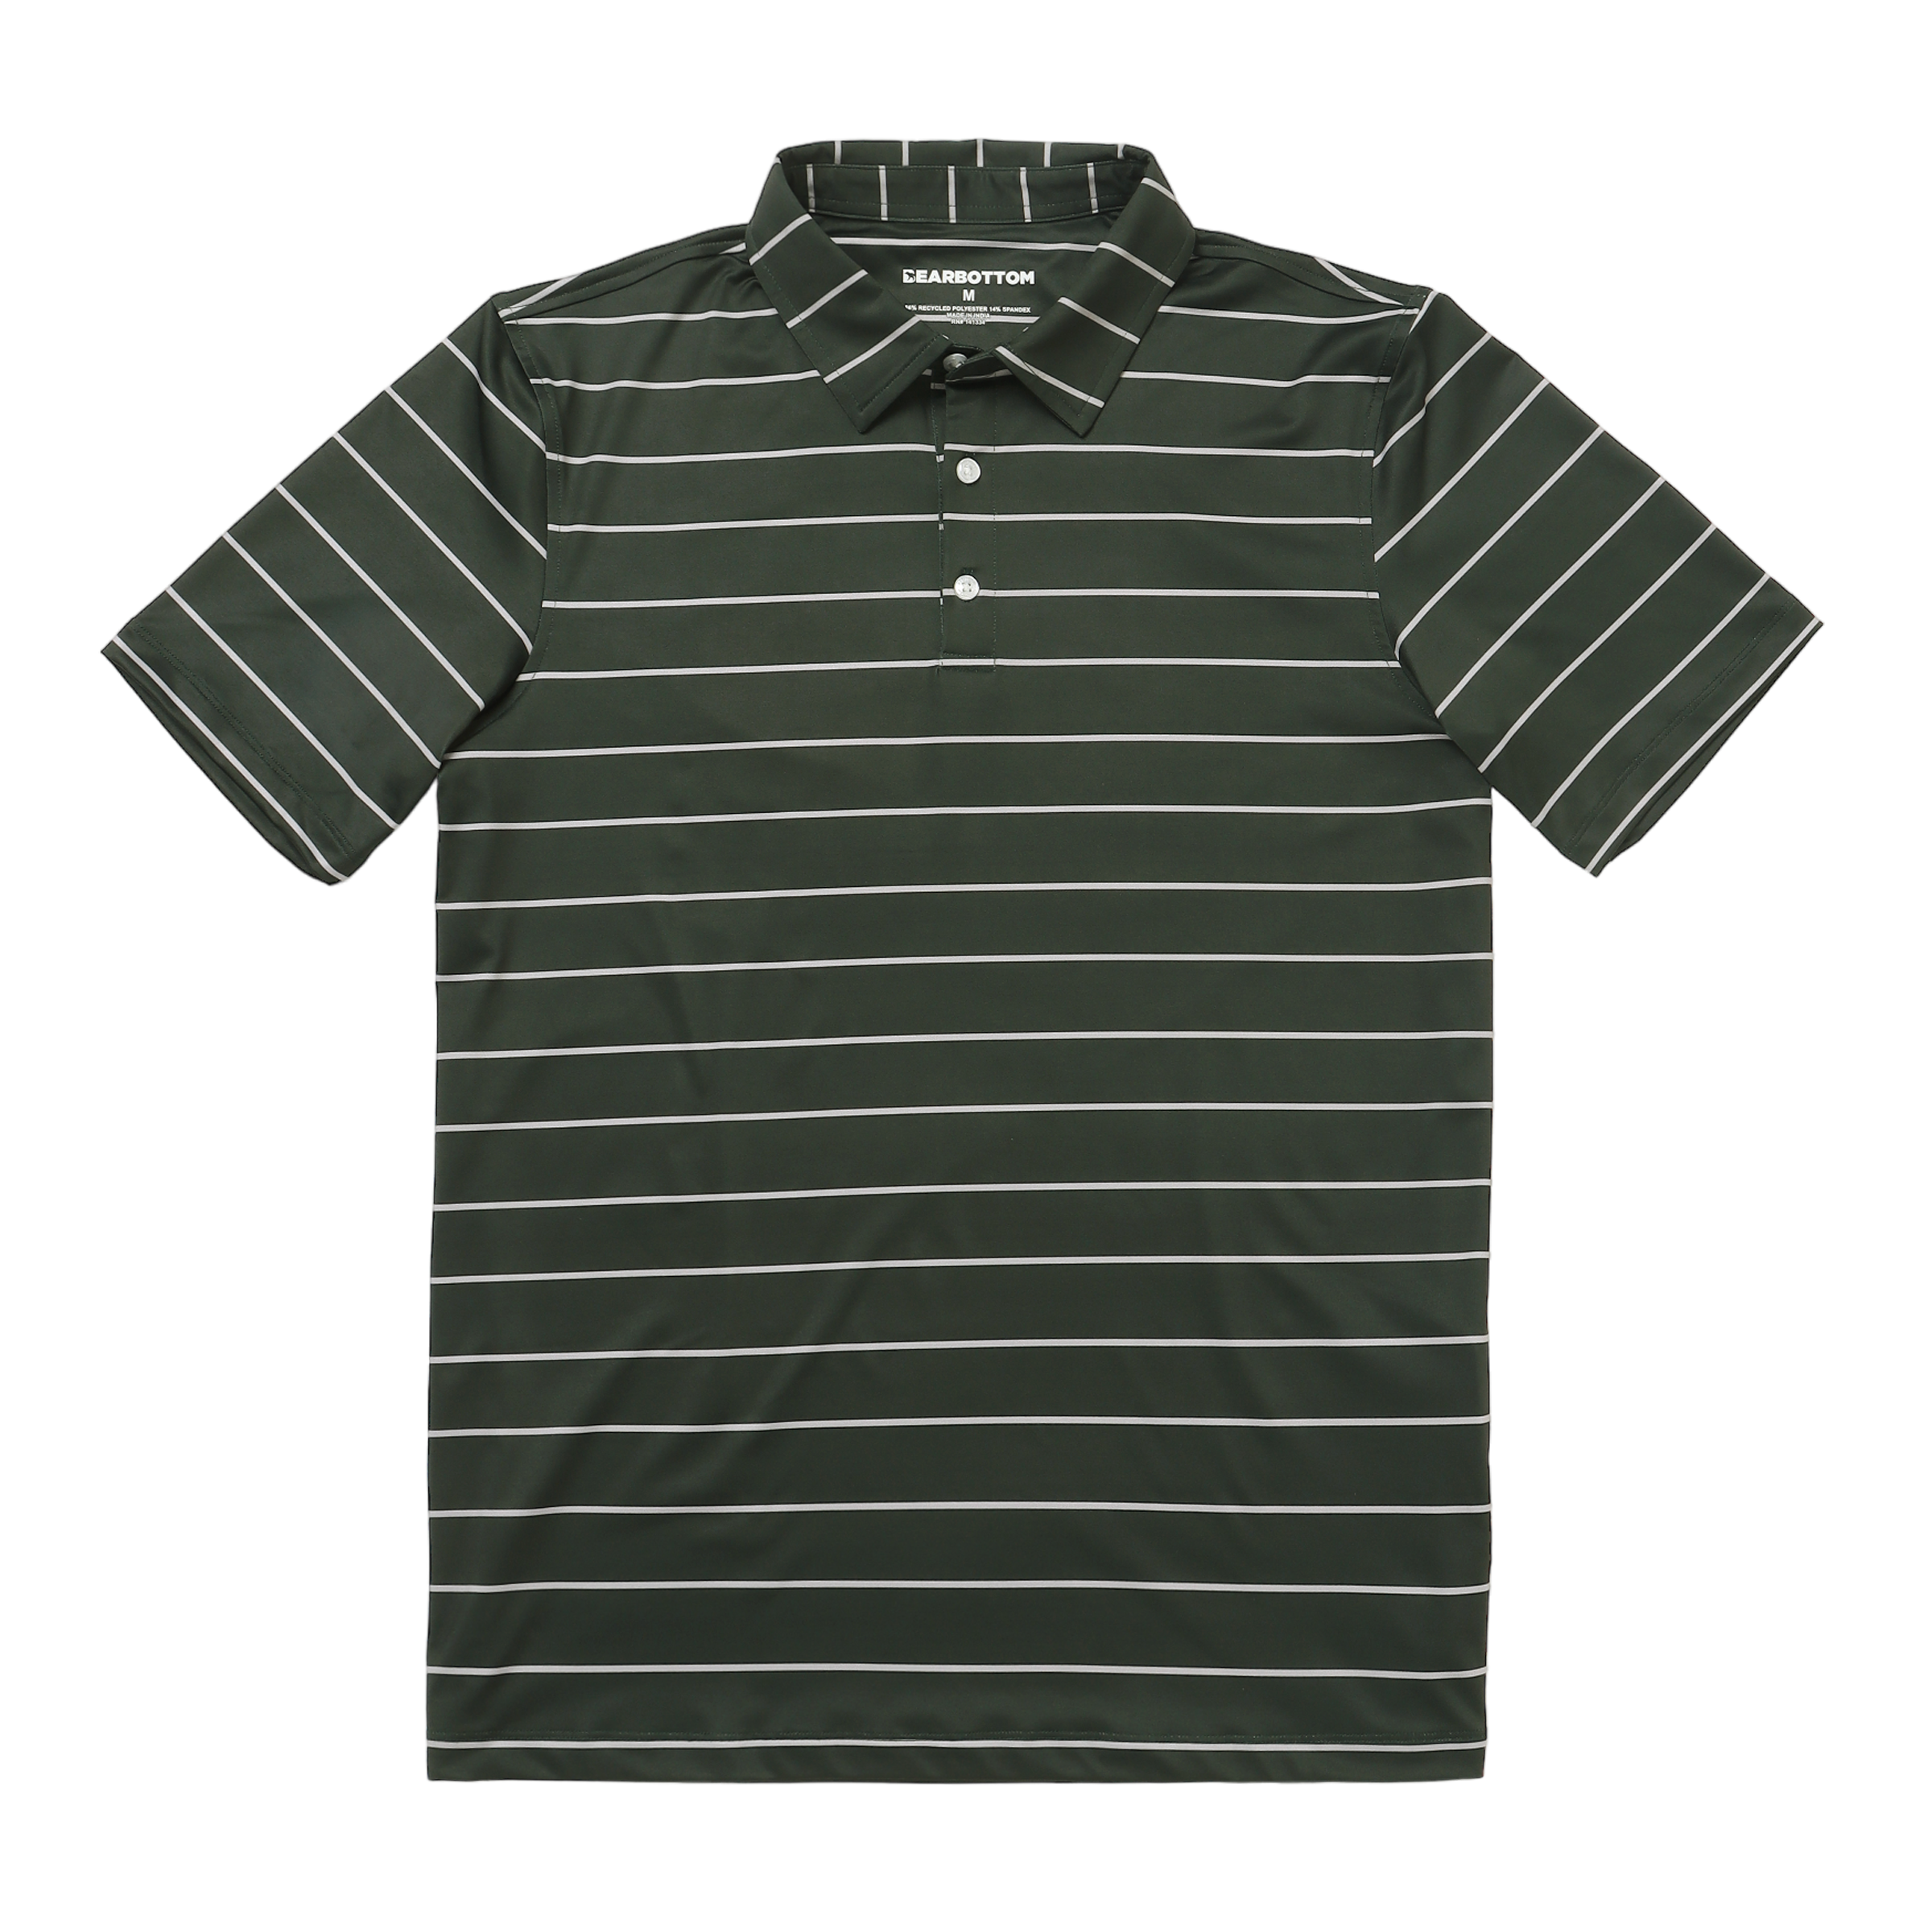 Performance Stripe Polo Forest Stripe front with collar, short sleeves, and 3 buttons